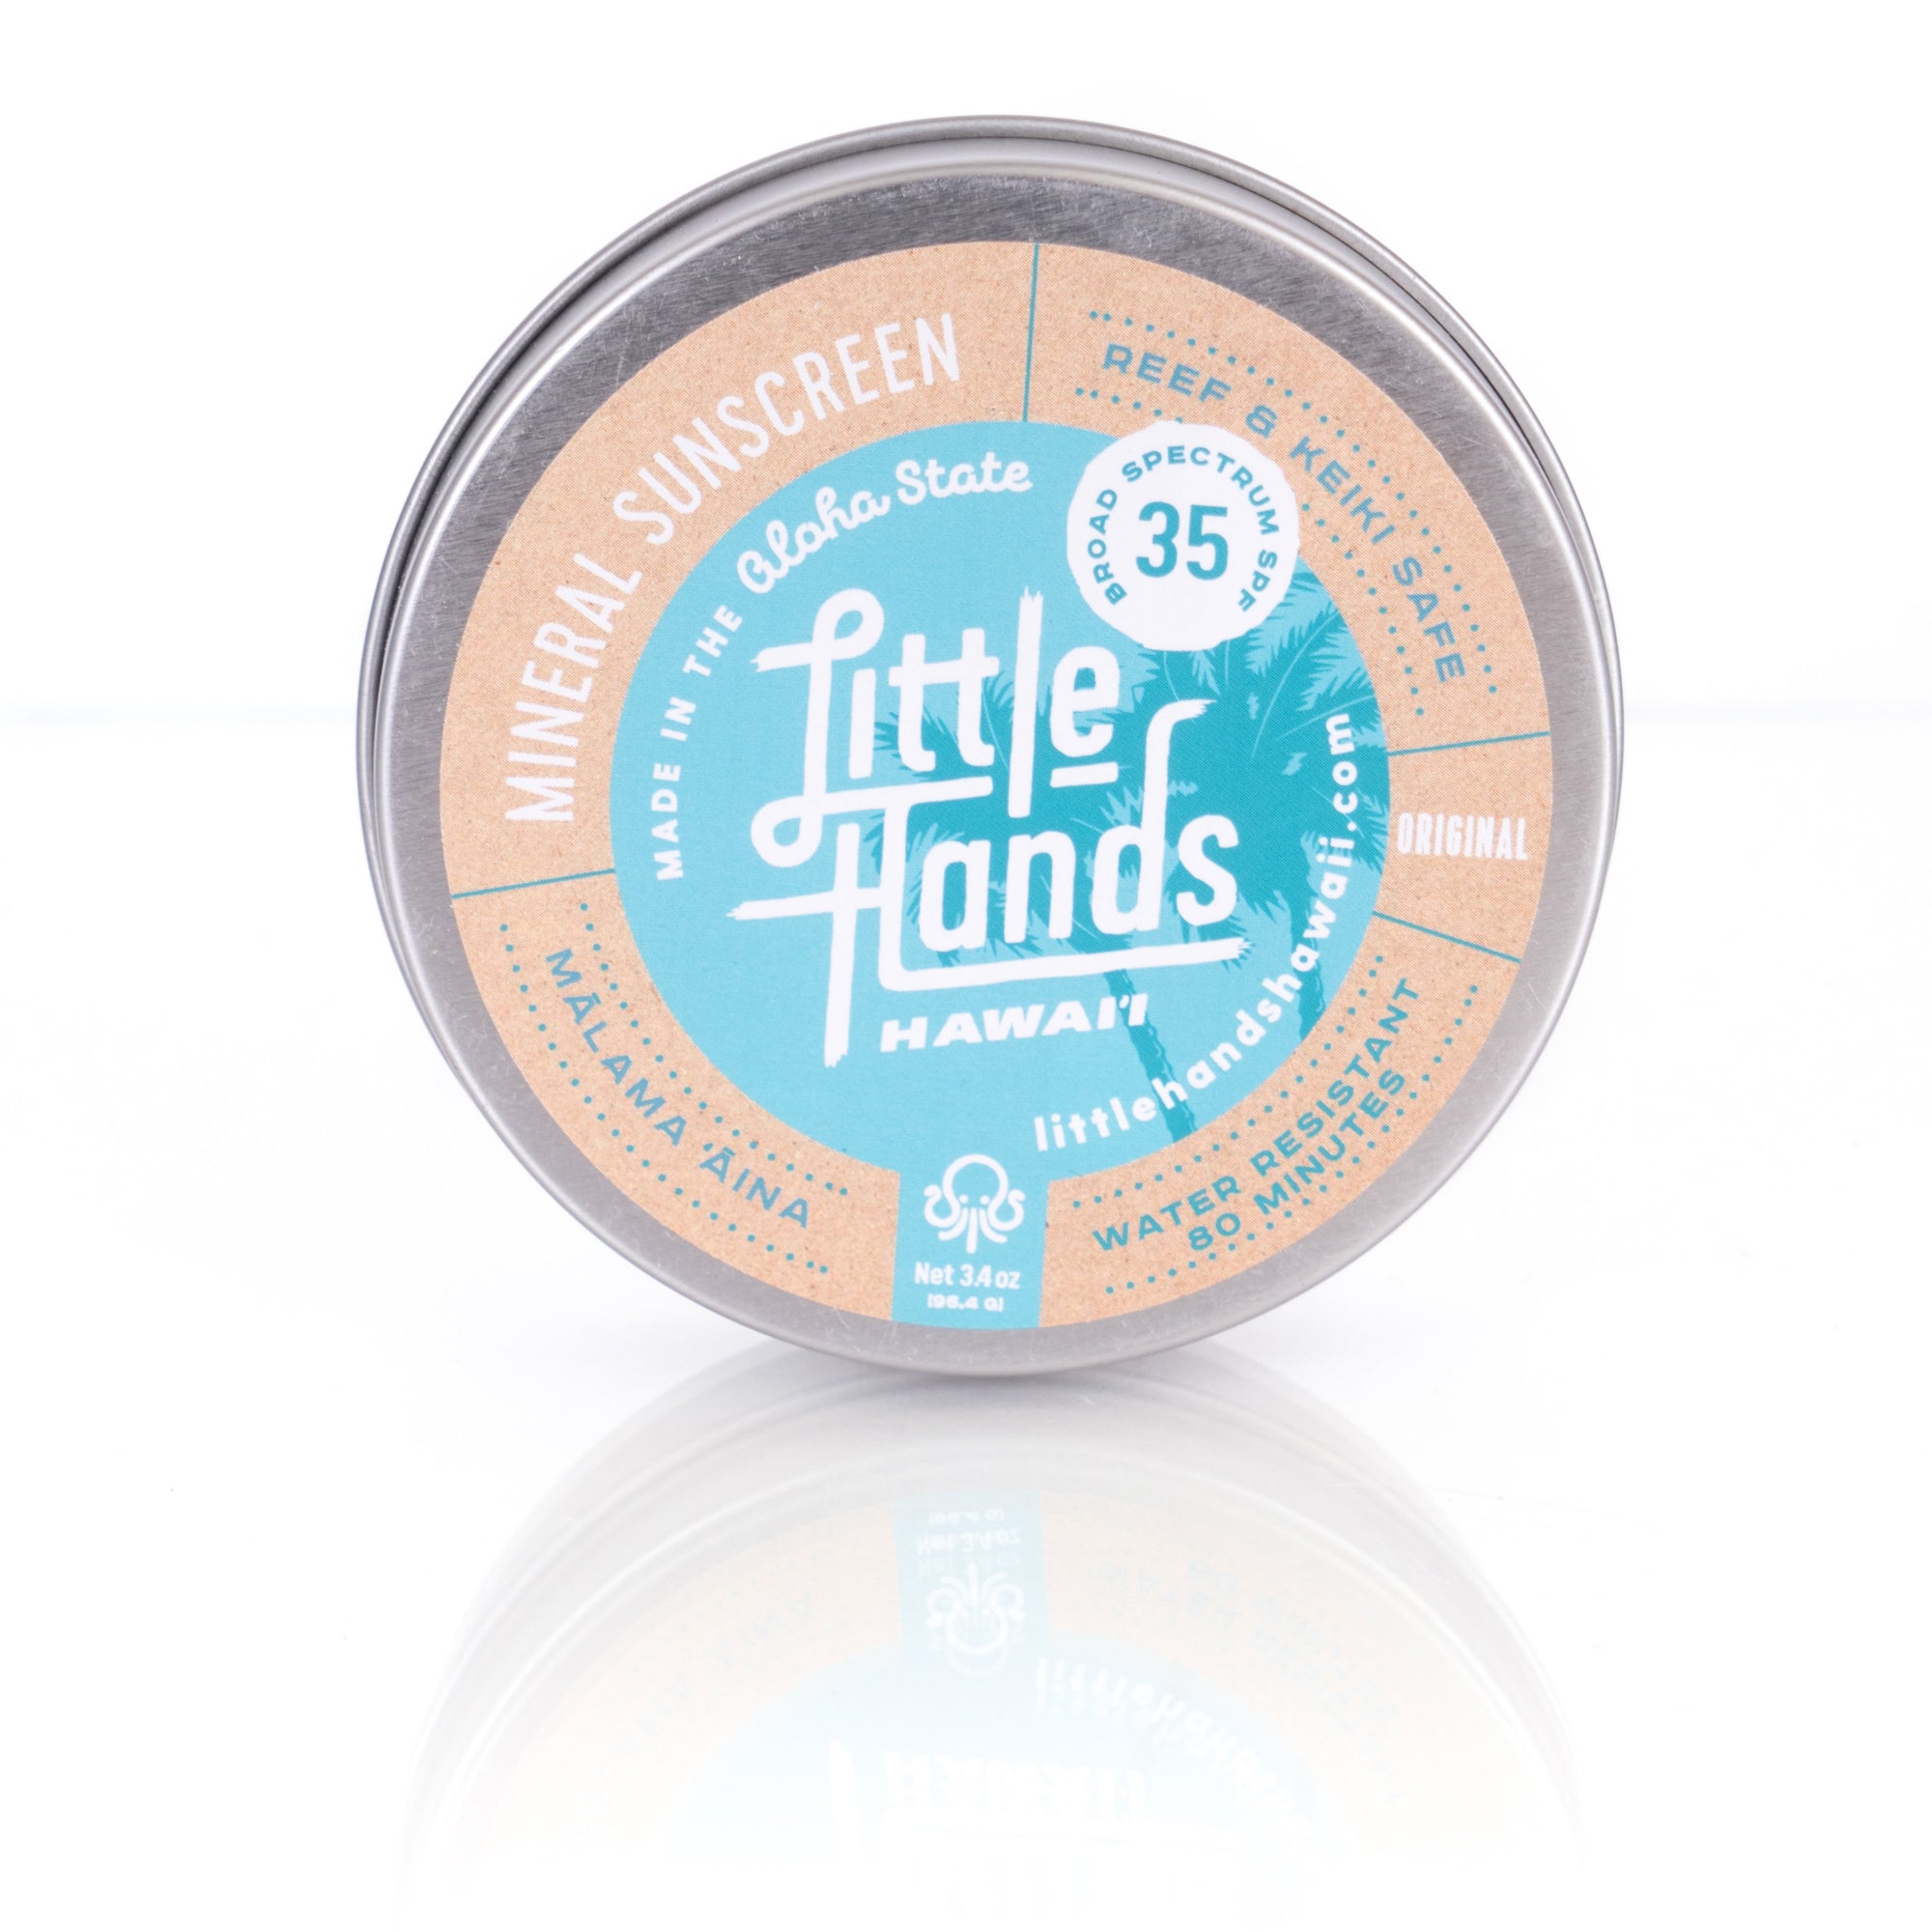 Little Hands - Body & Face Mineral Sunscreen Tin - Tinted  - Free Travel Size Mineral Sunscreen With Purchase!